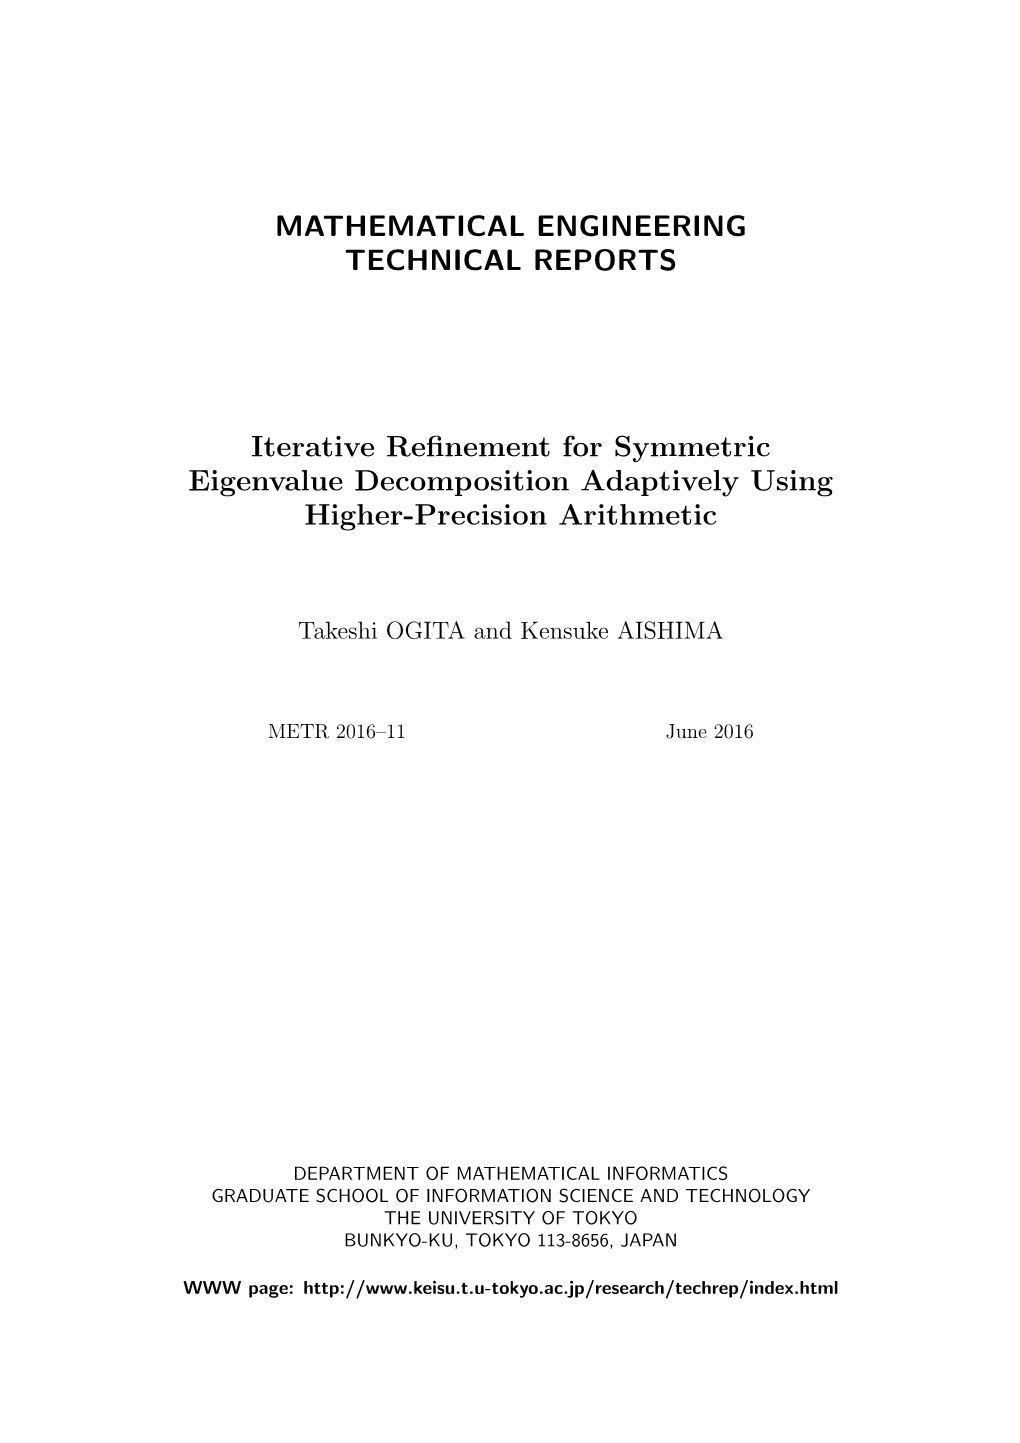 MATHEMATICAL ENGINEERING TECHNICAL REPORTS Iterative